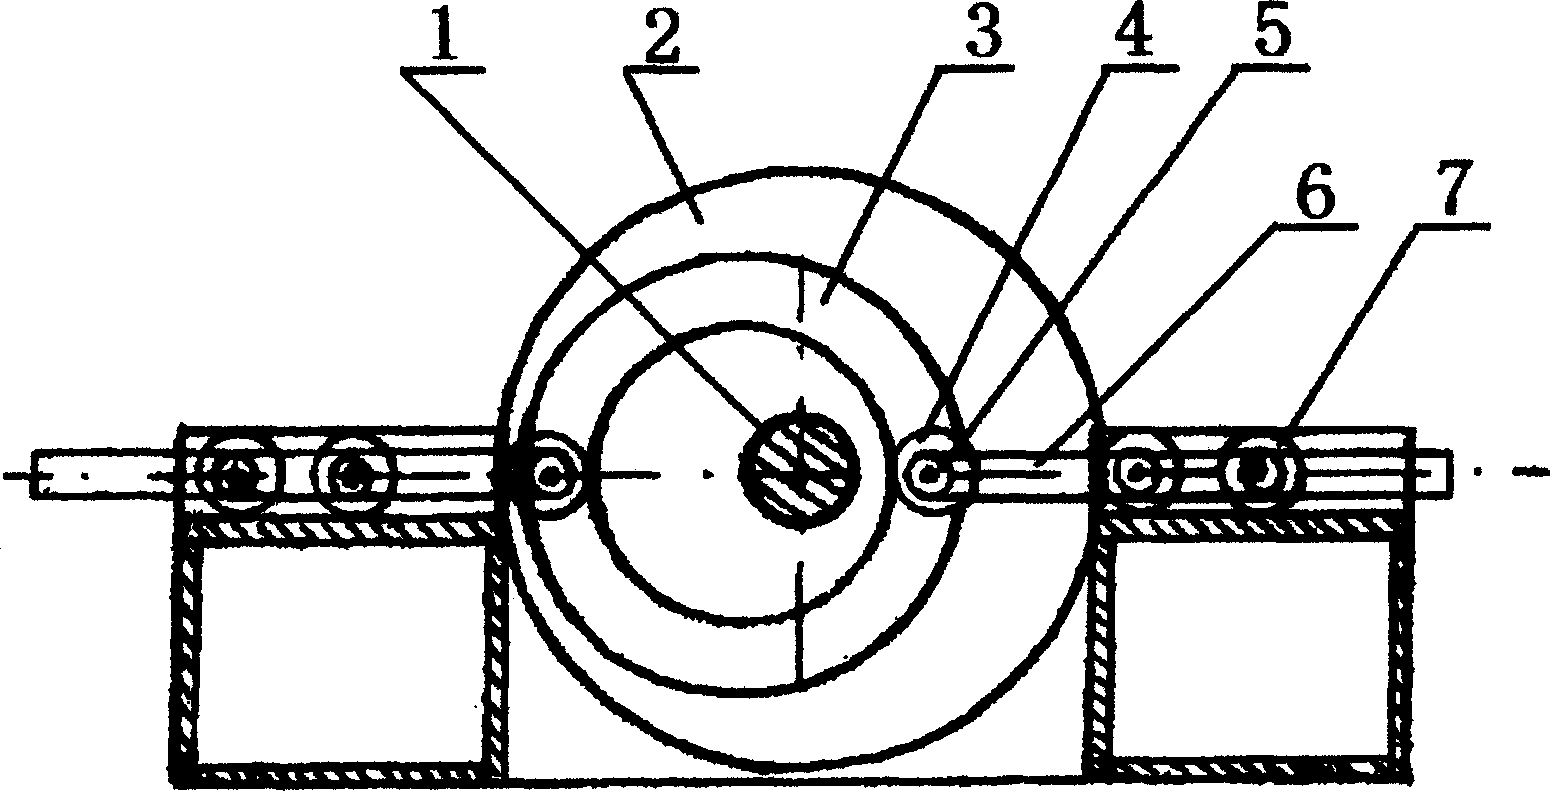 Driving mechanism with eccentric round cam groove